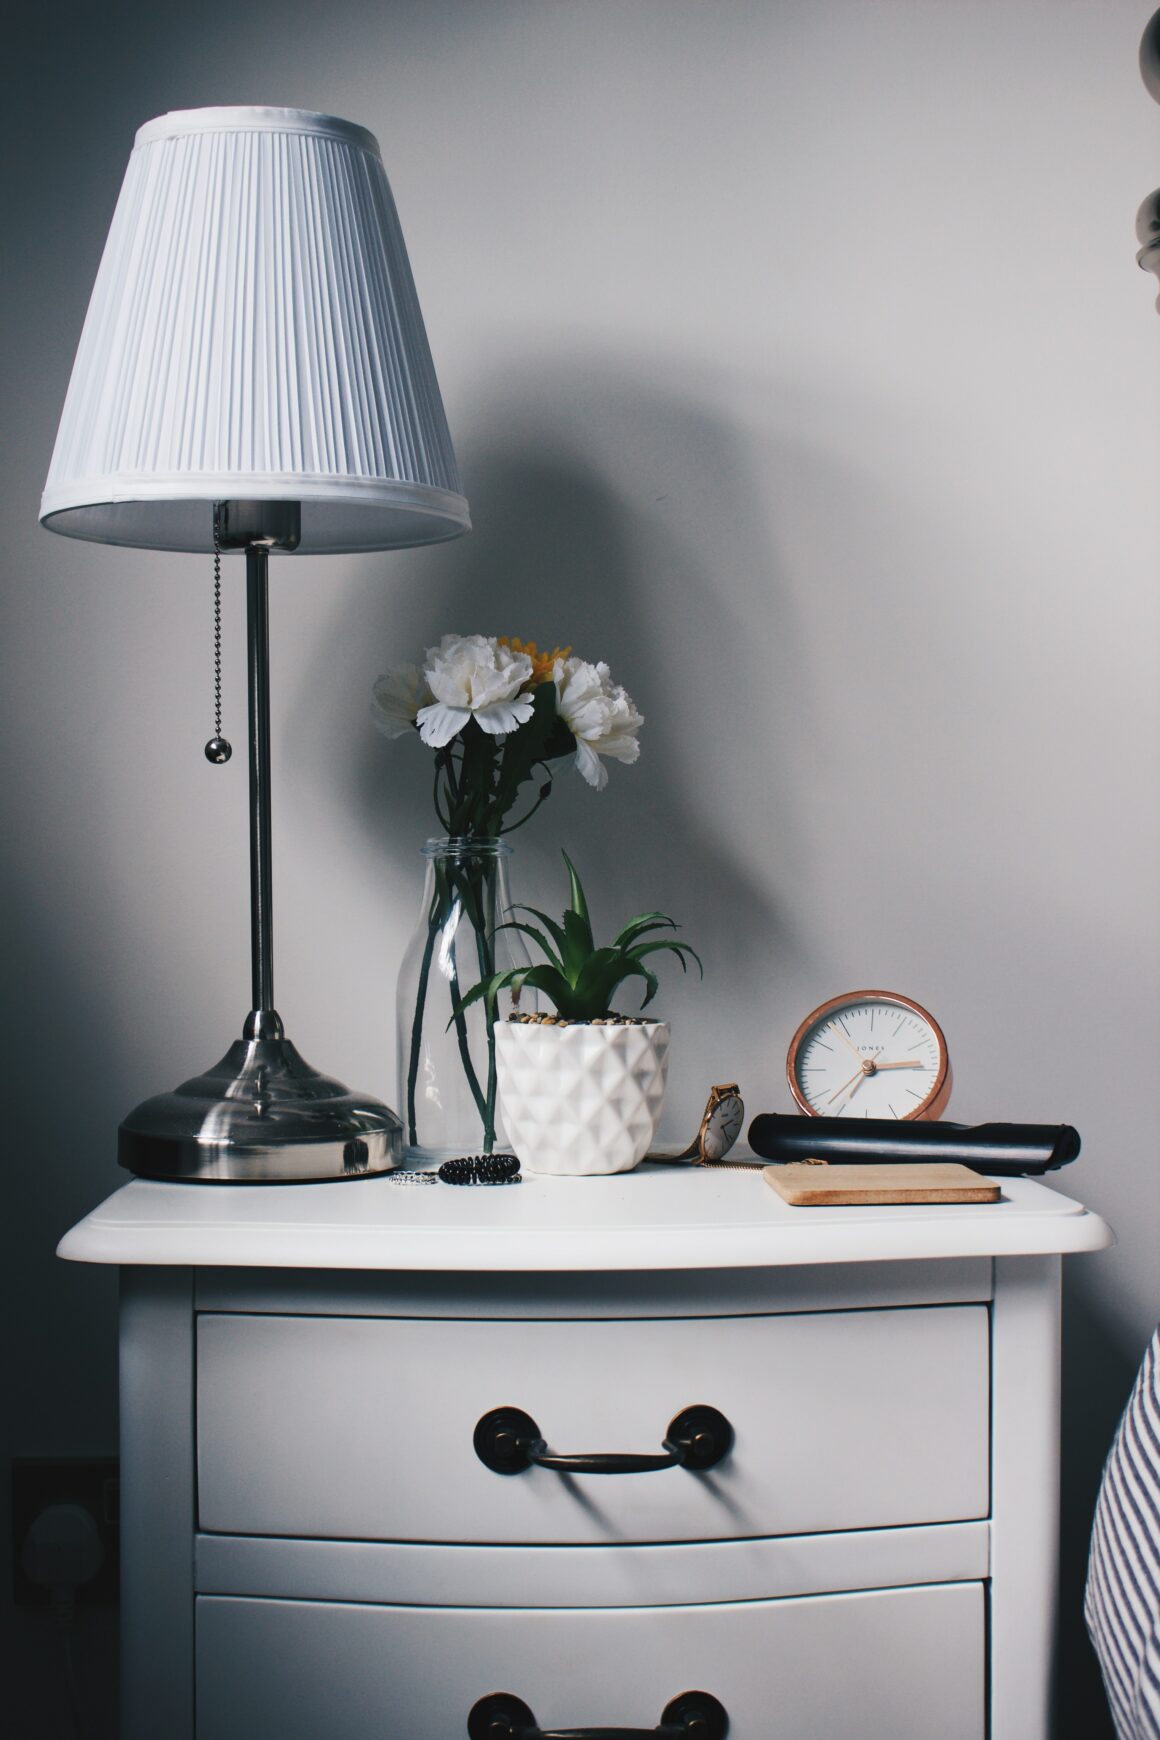 White bedside table decorated with a lamp, flowers, alarm clock, and remote